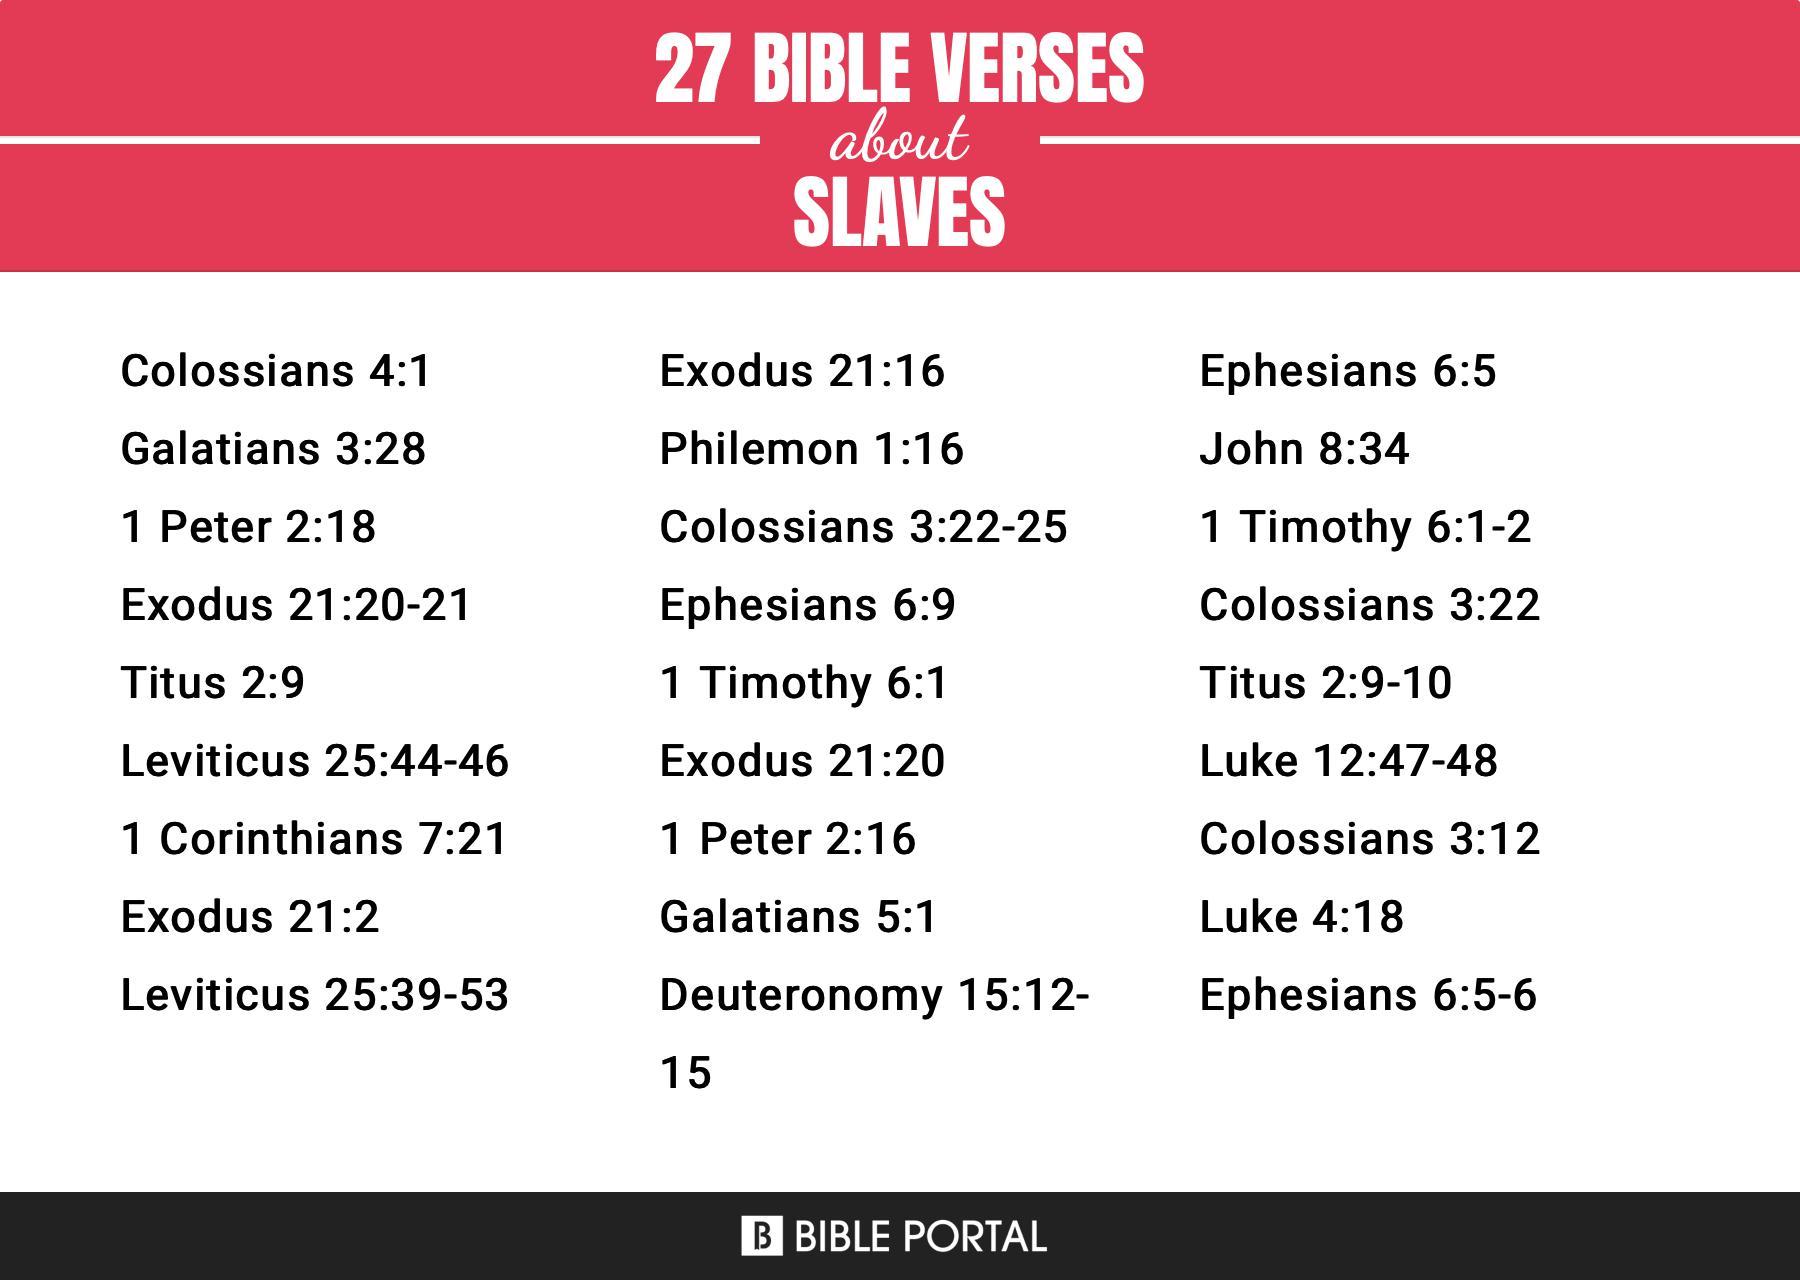 27 Bible Verses about Slaves